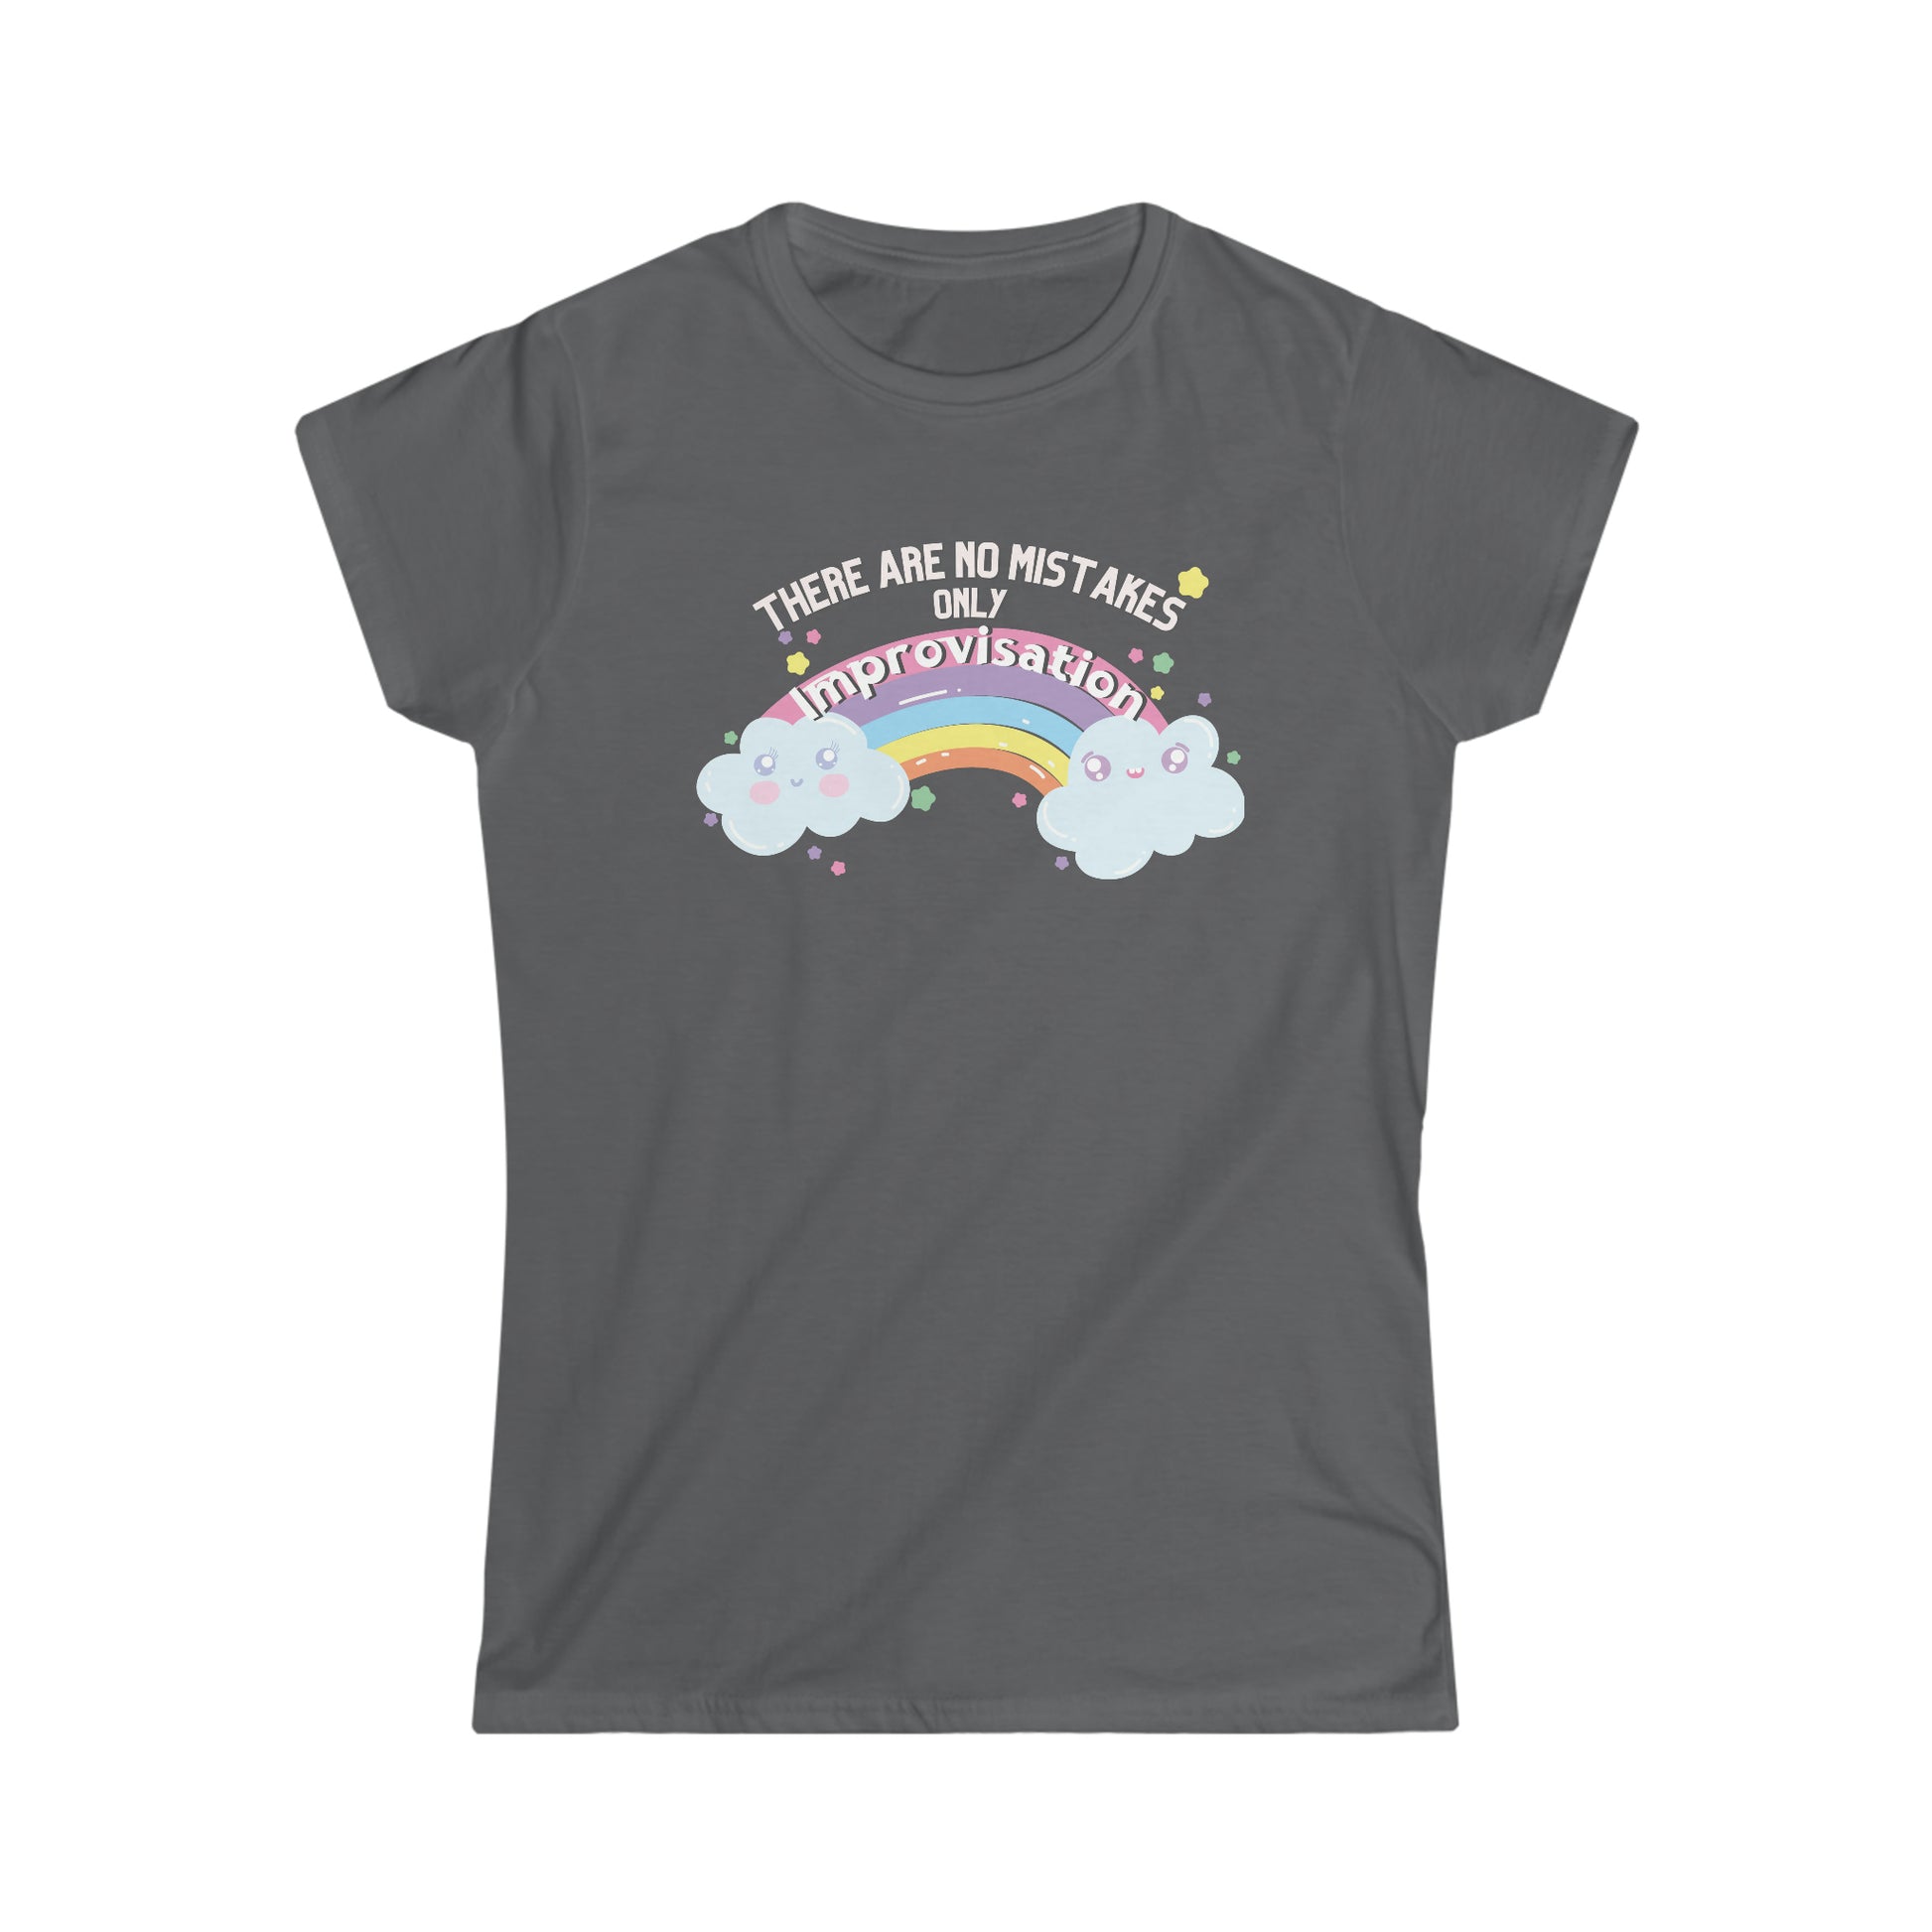 Funny dance tshirt with the text "there are no mistakes only improvisation" and two happy clouds connected by a rainbow